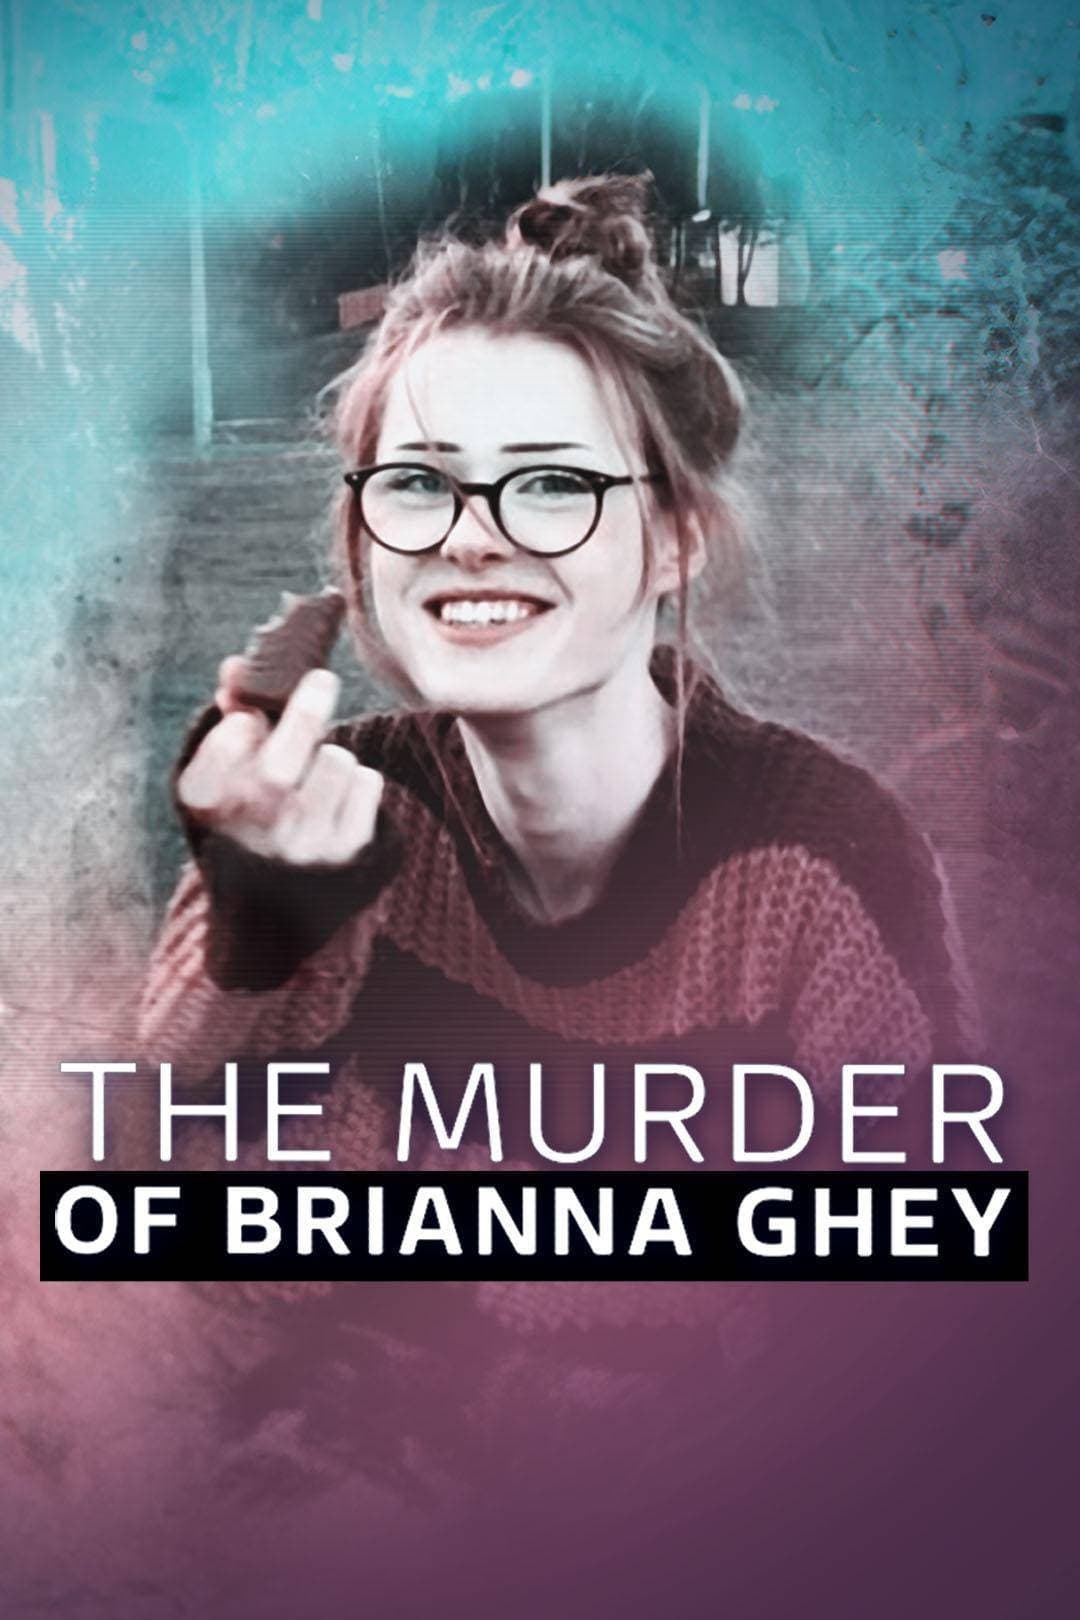 The Murder of Brianna Ghey: An ITV News Special